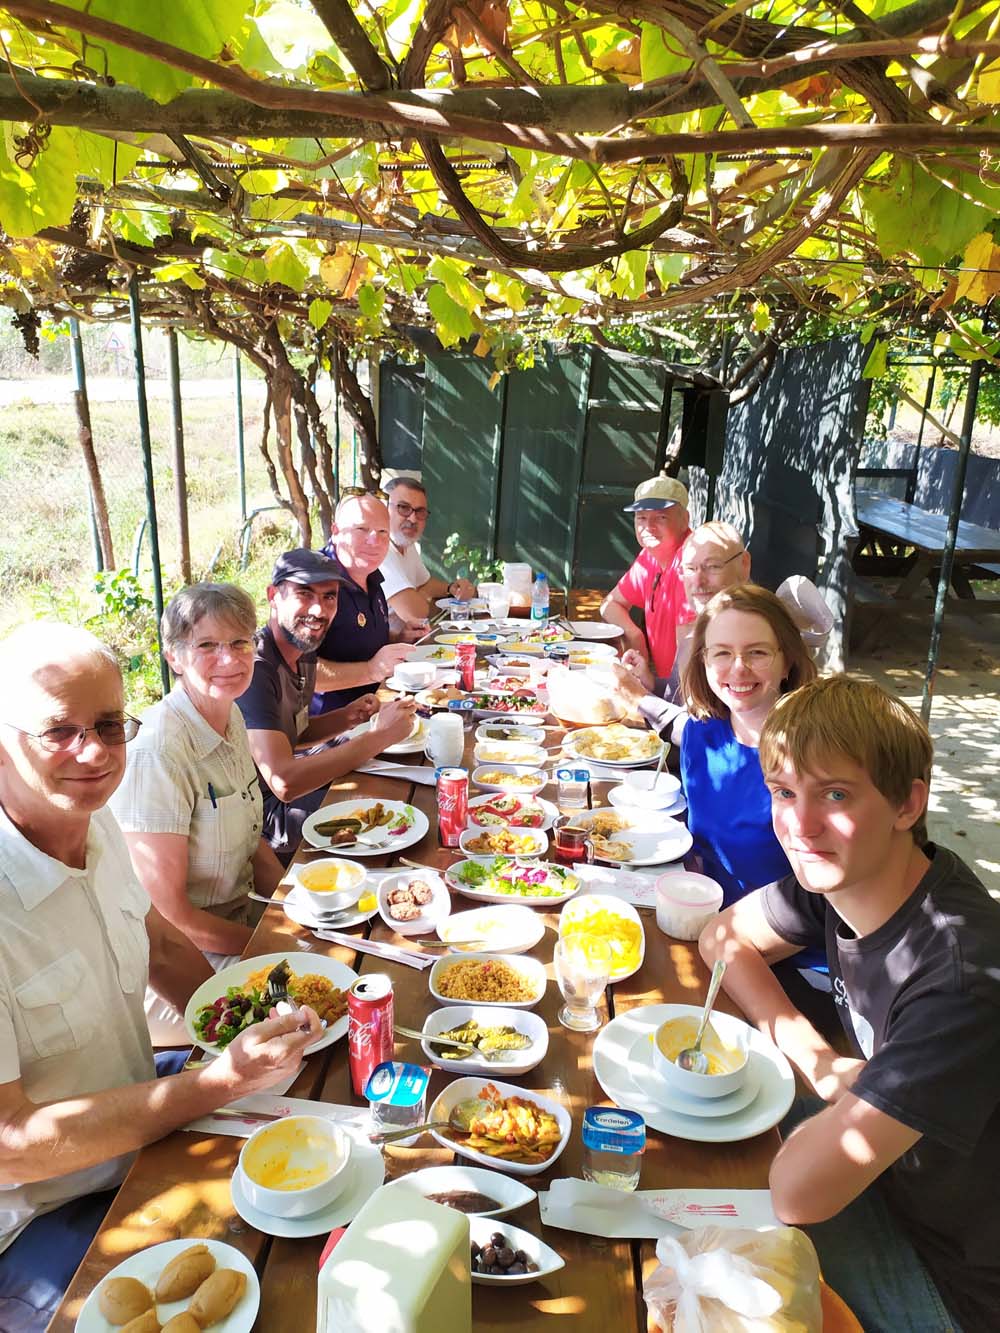 The tour group seated around a long table loaded with food, under a leafy arbor of vines.